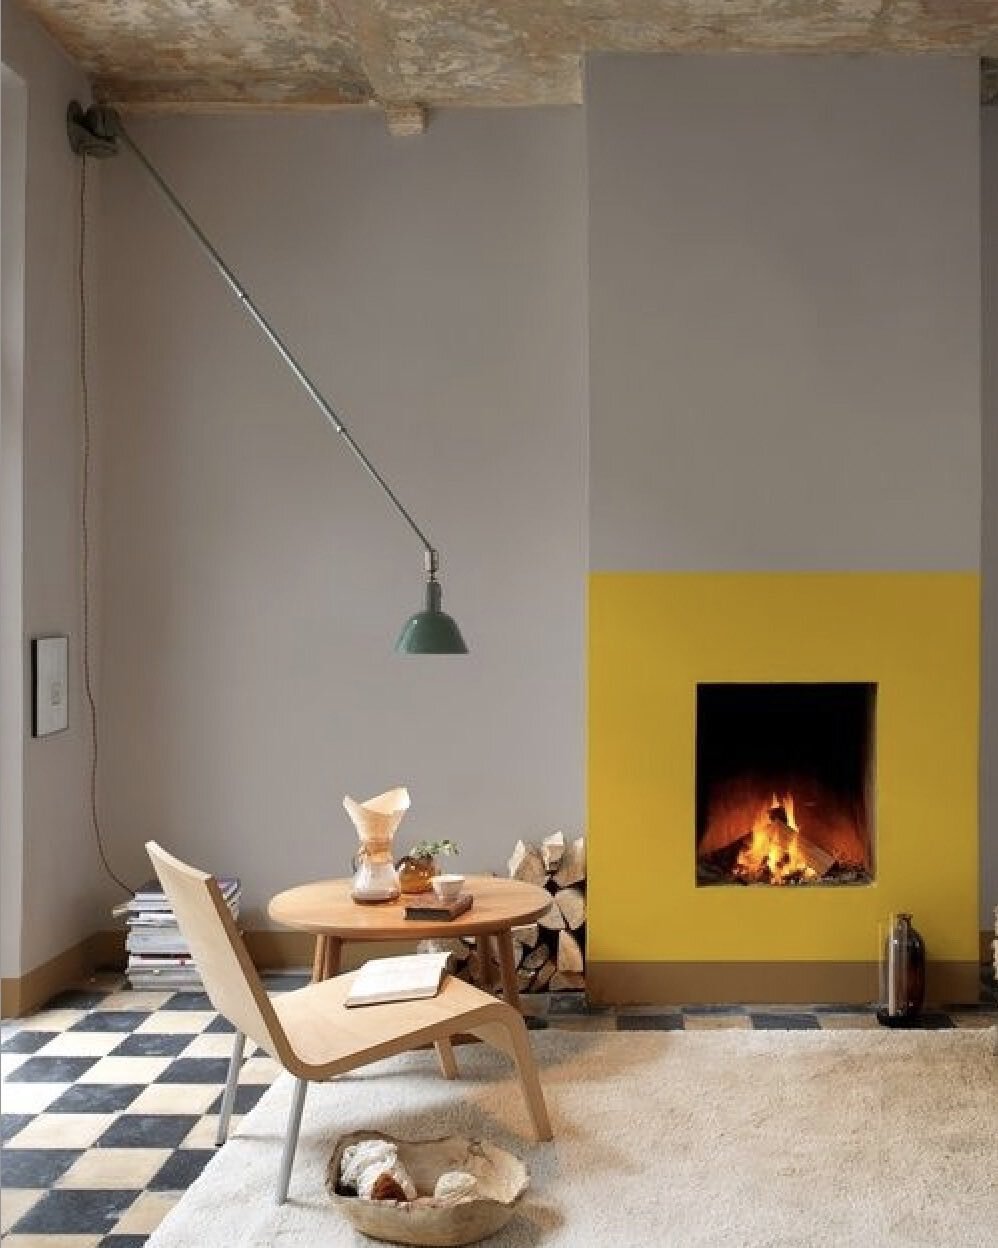 So simple and so effective🌼

#colour #fireplace #yellowfireplace #creative #interiordesign